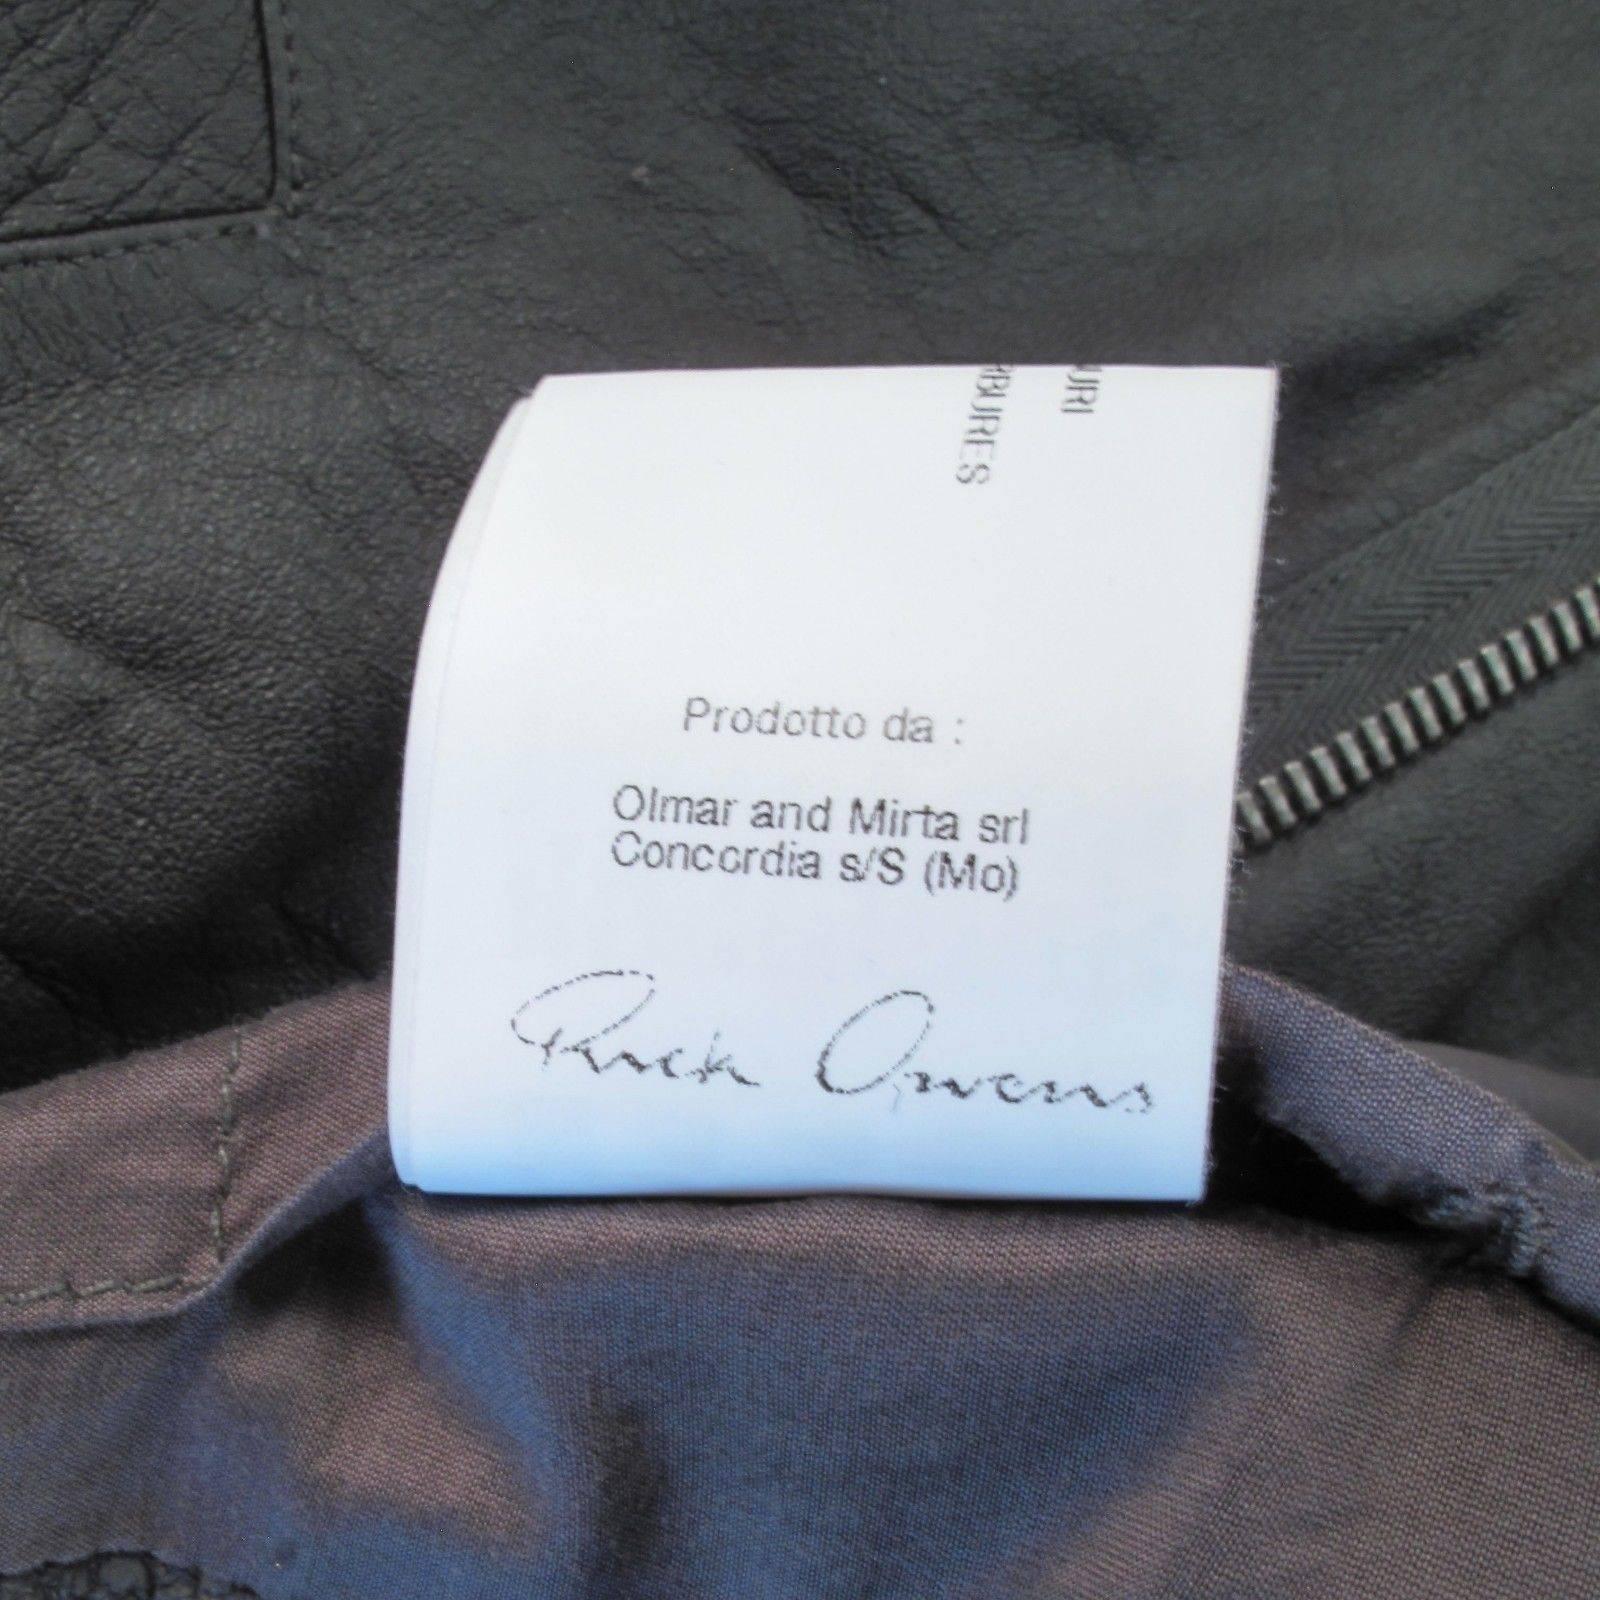 Rick Owens - Leather Jacket In Good Condition For Sale In Prahran, Victoria